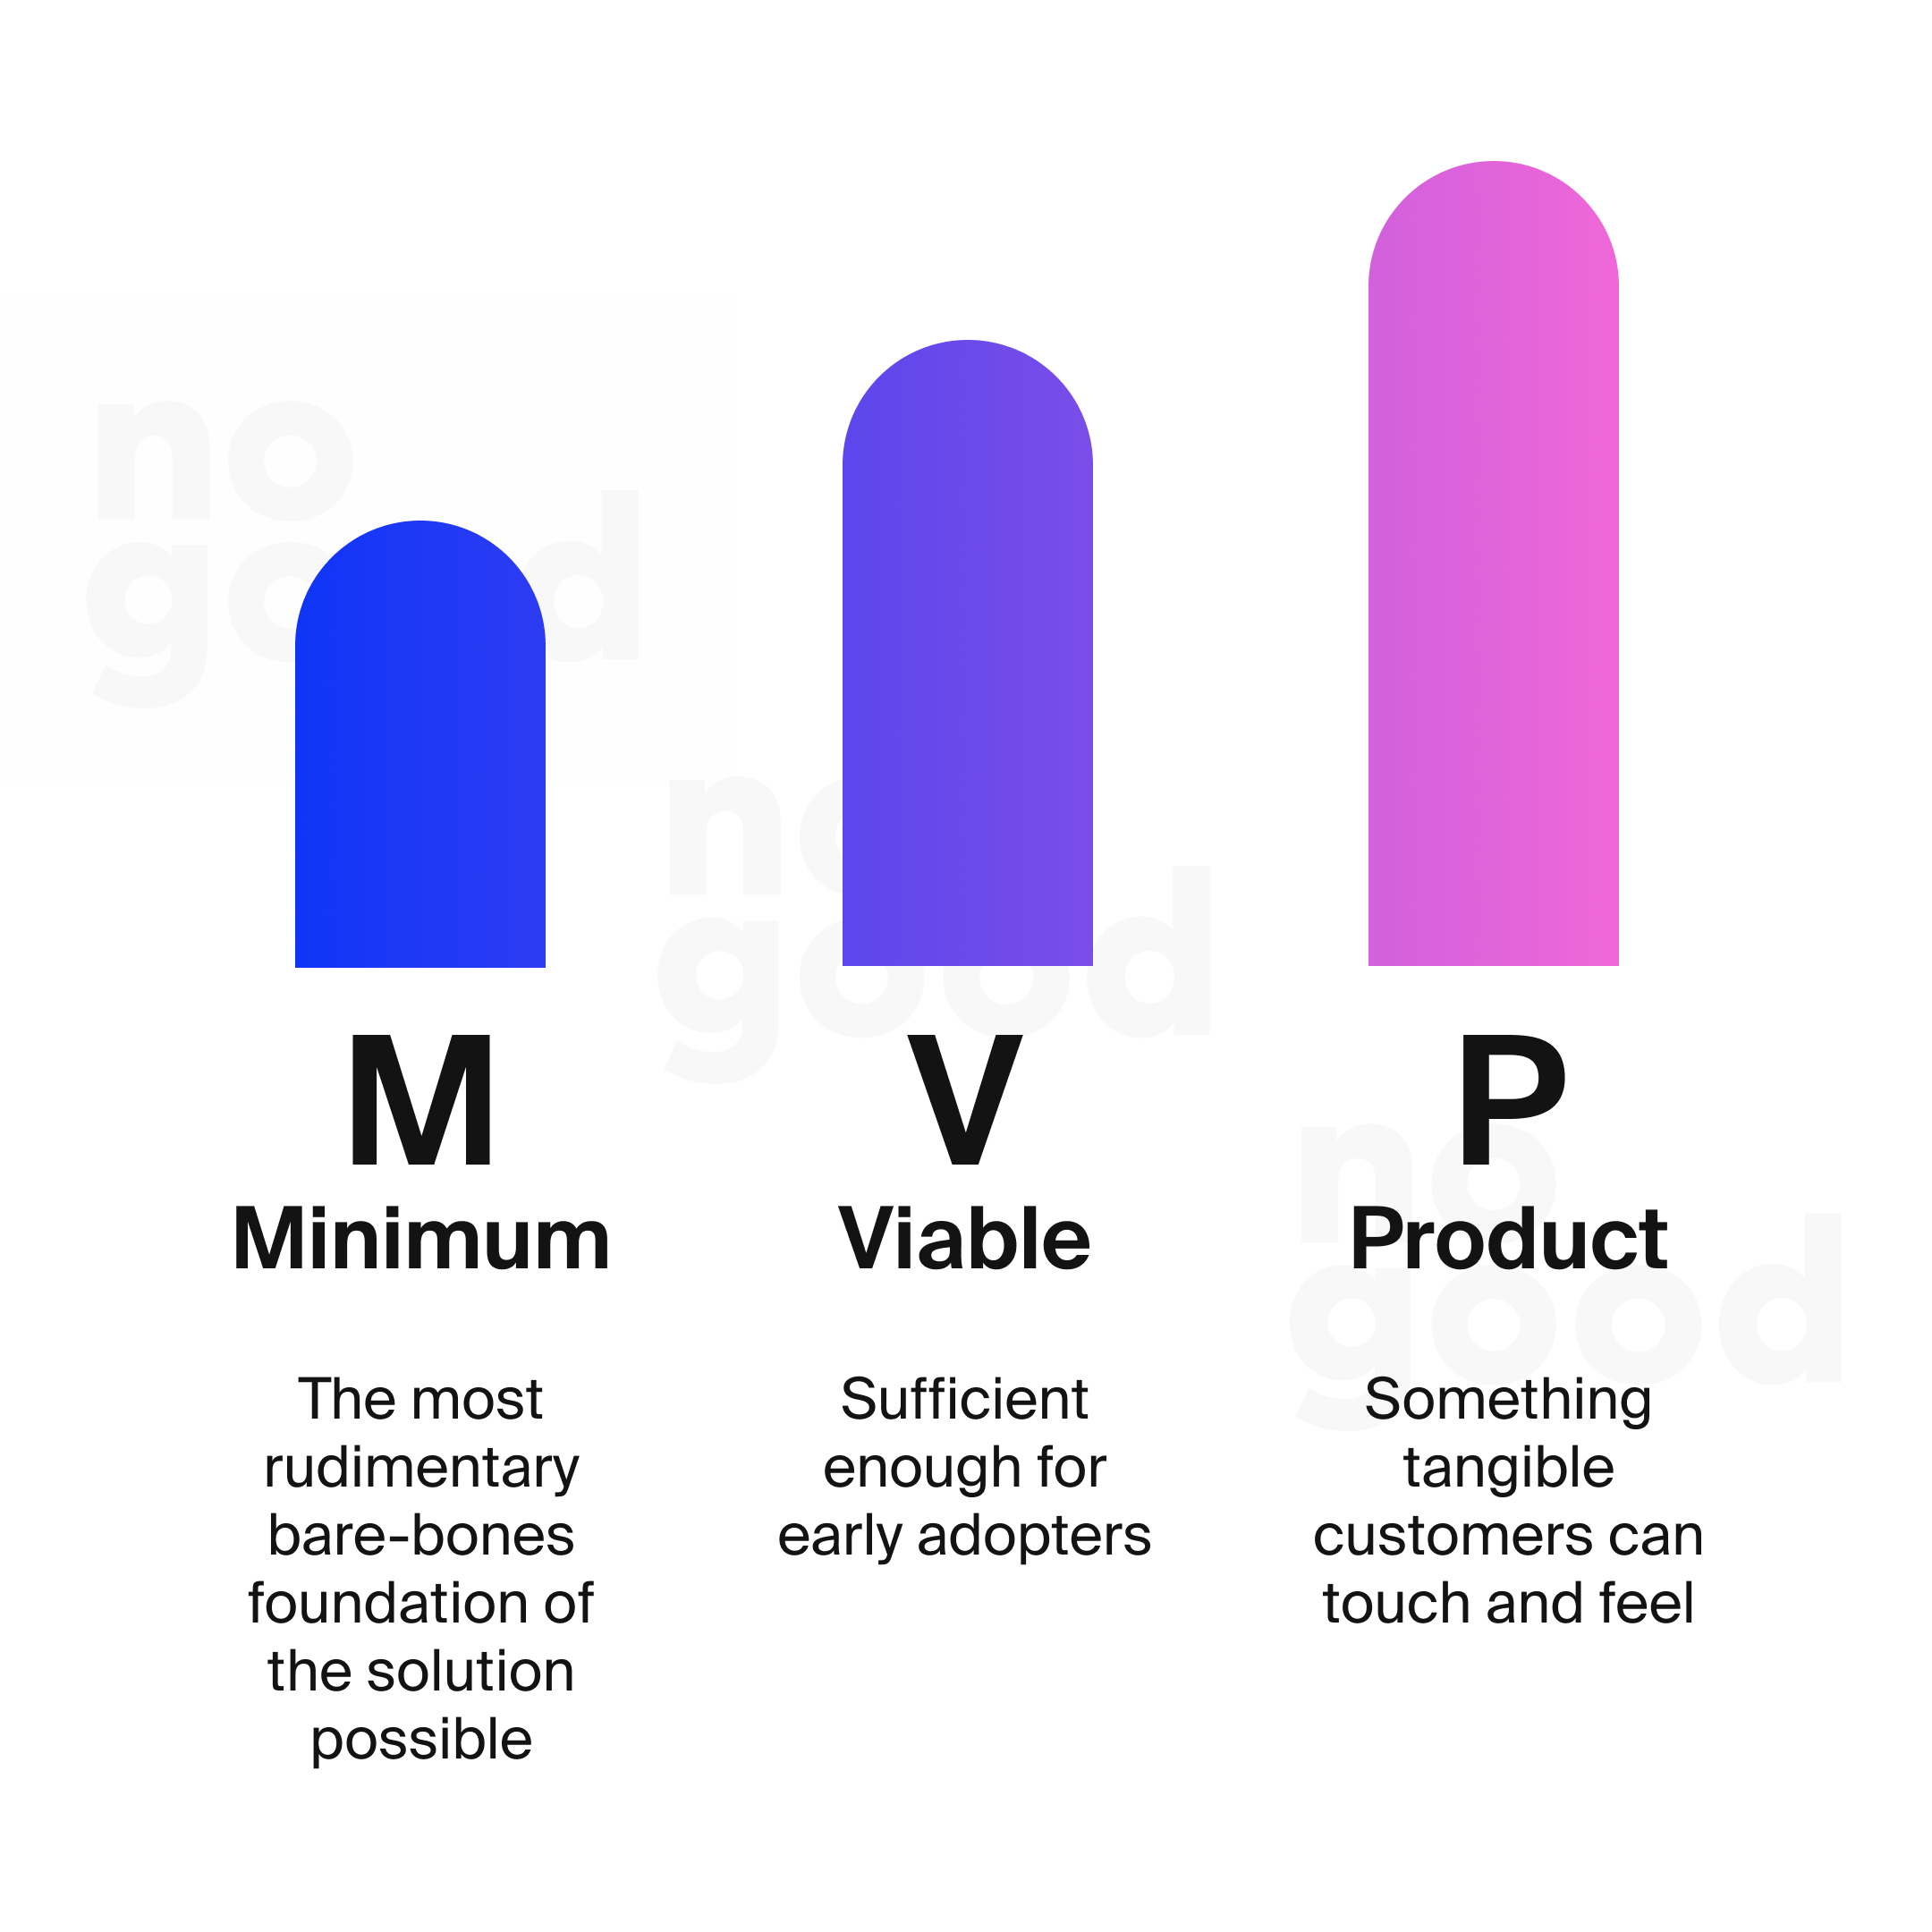 How a brand goes to market: Minimum Viable Product (MVP)